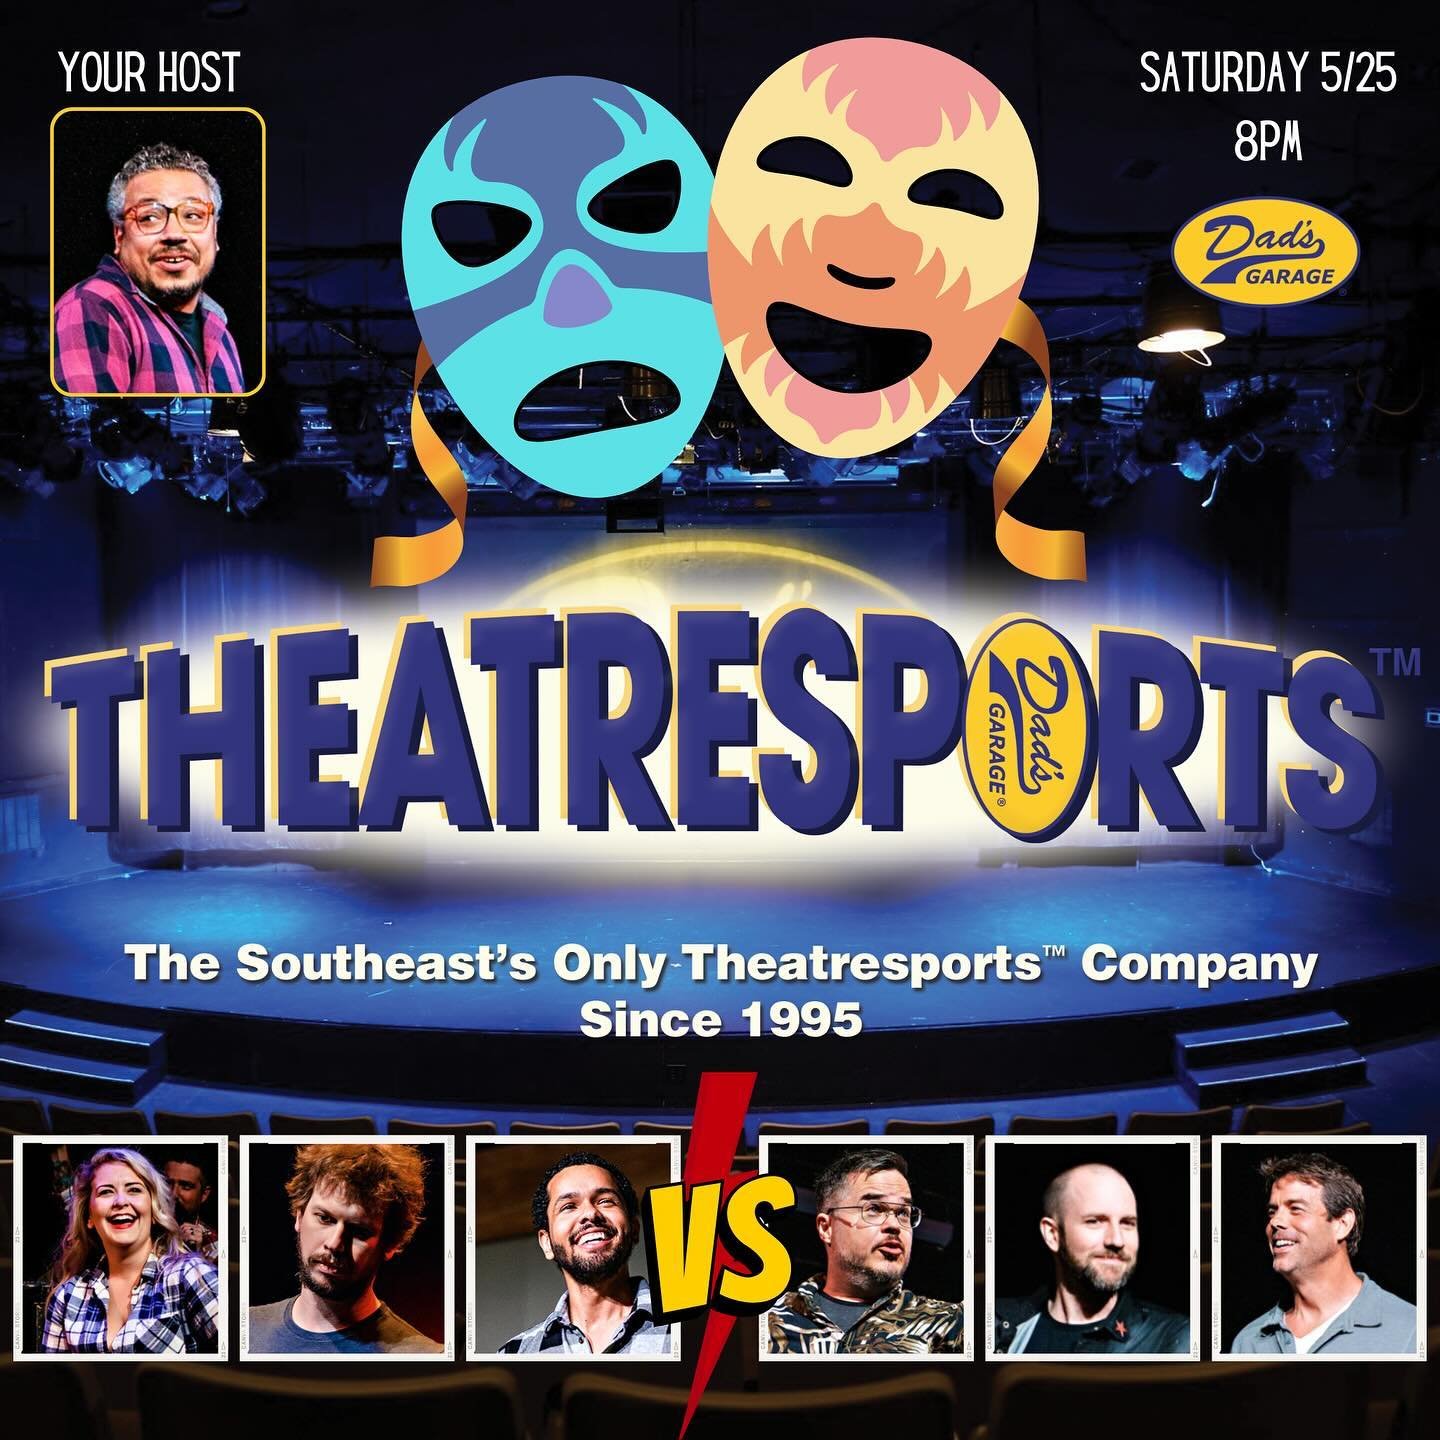 Saturday night is (at least) alright! See TheatreSports at 8pm featuring your favorites, and then exchange your ticket for FREE entry to 7 Minutes in Kevin at 10pm! Or, you know, just see one of the shows if you&rsquo;re into that sort of thing. You 